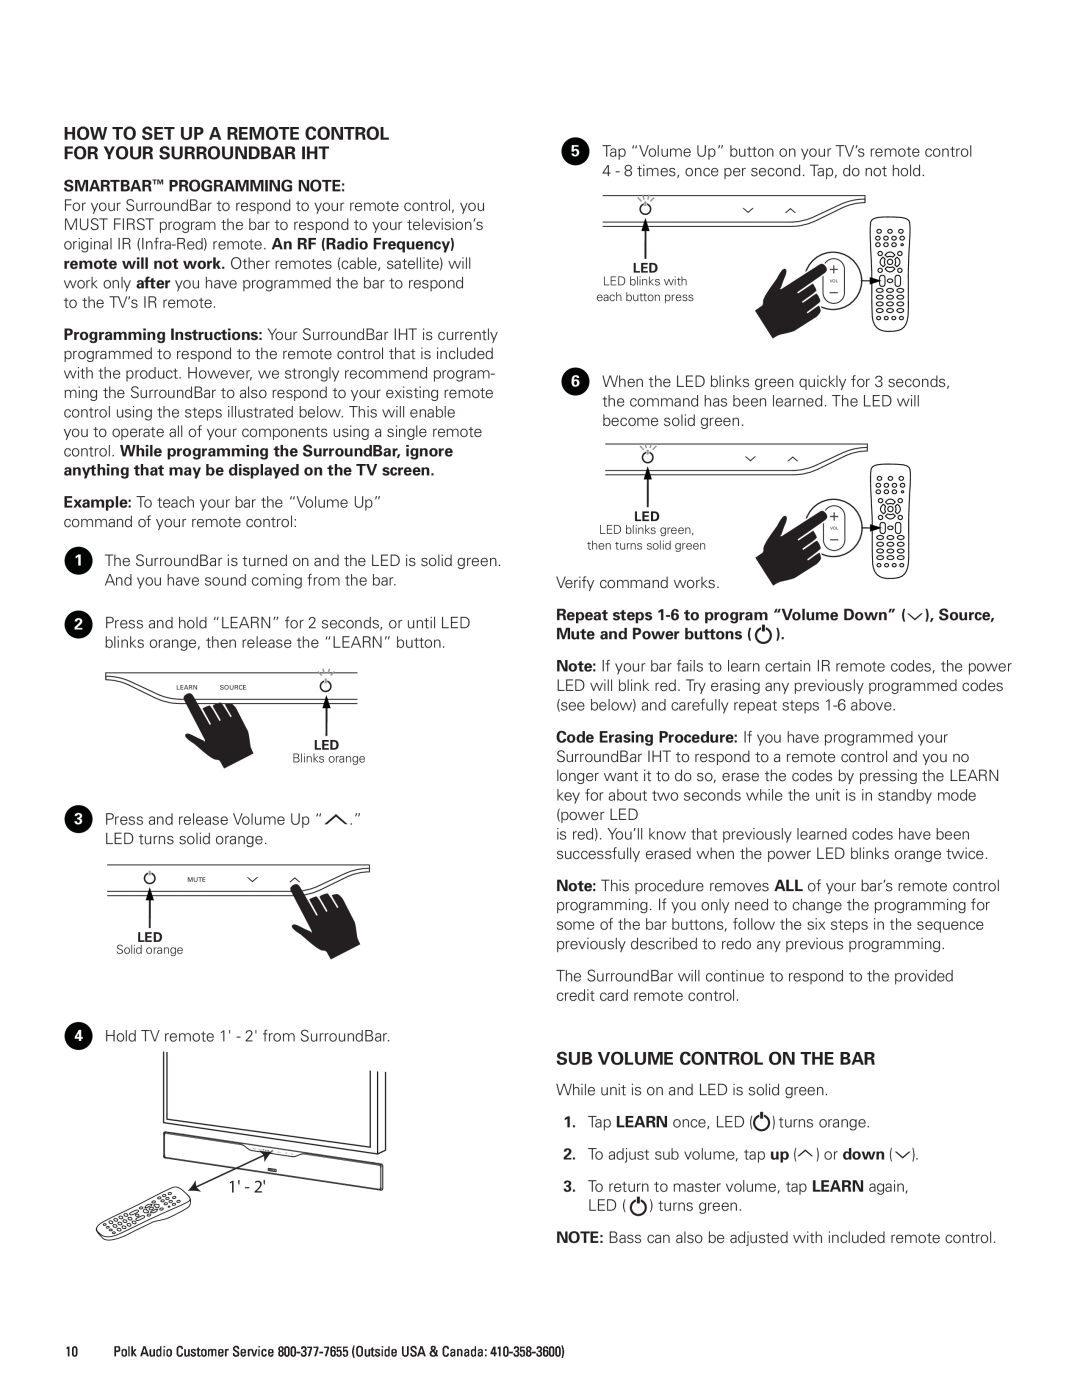 Polk Audio 5000 manual How To Set Up A Remote Control, For Your Surroundbar Iht, Sub Volume Control On The Bar 